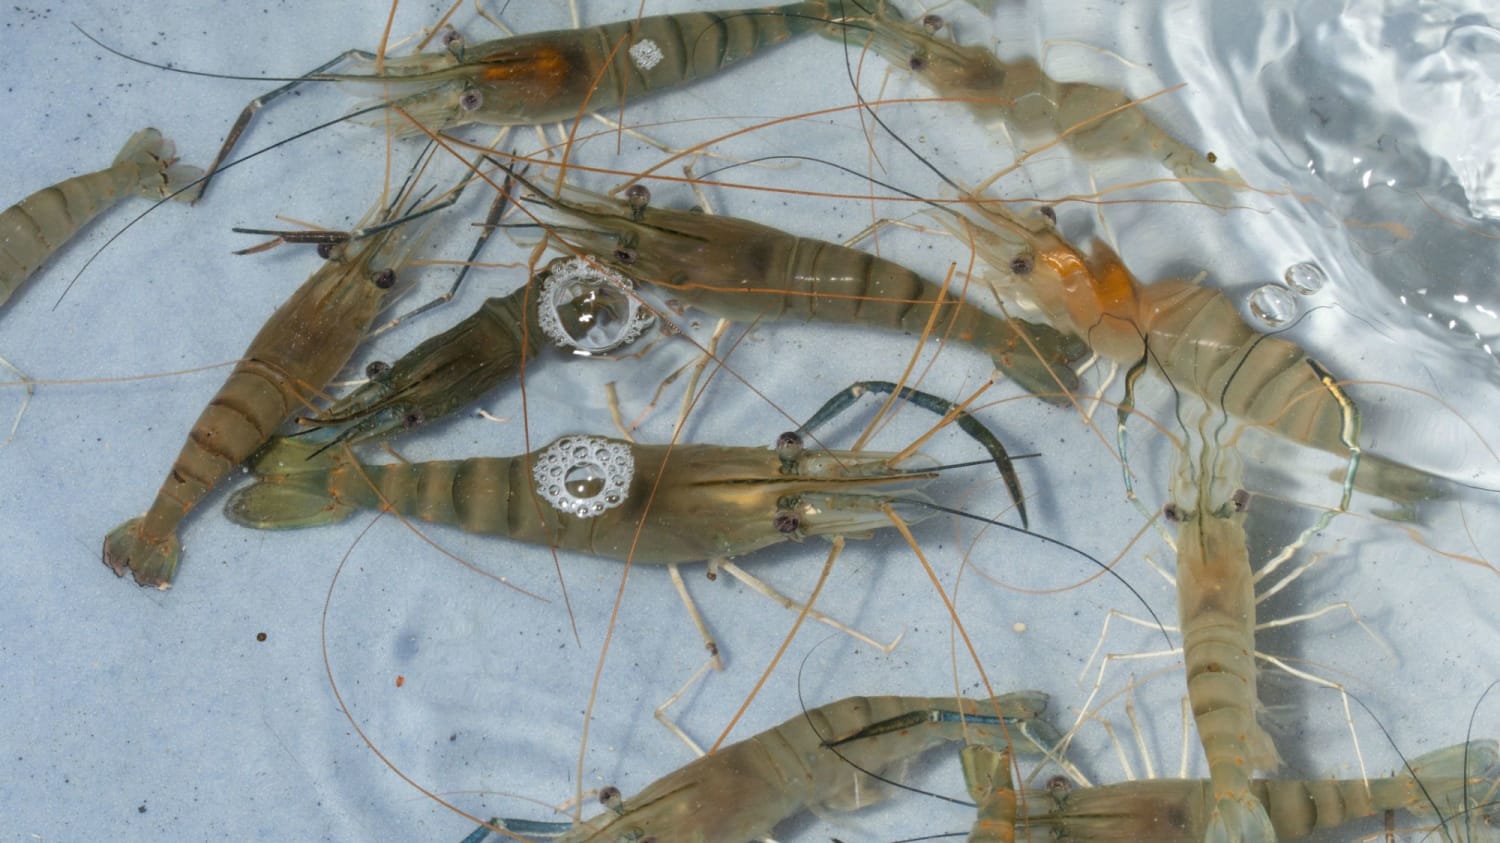 Shrimp in Rural England Have a Cocaine Problem